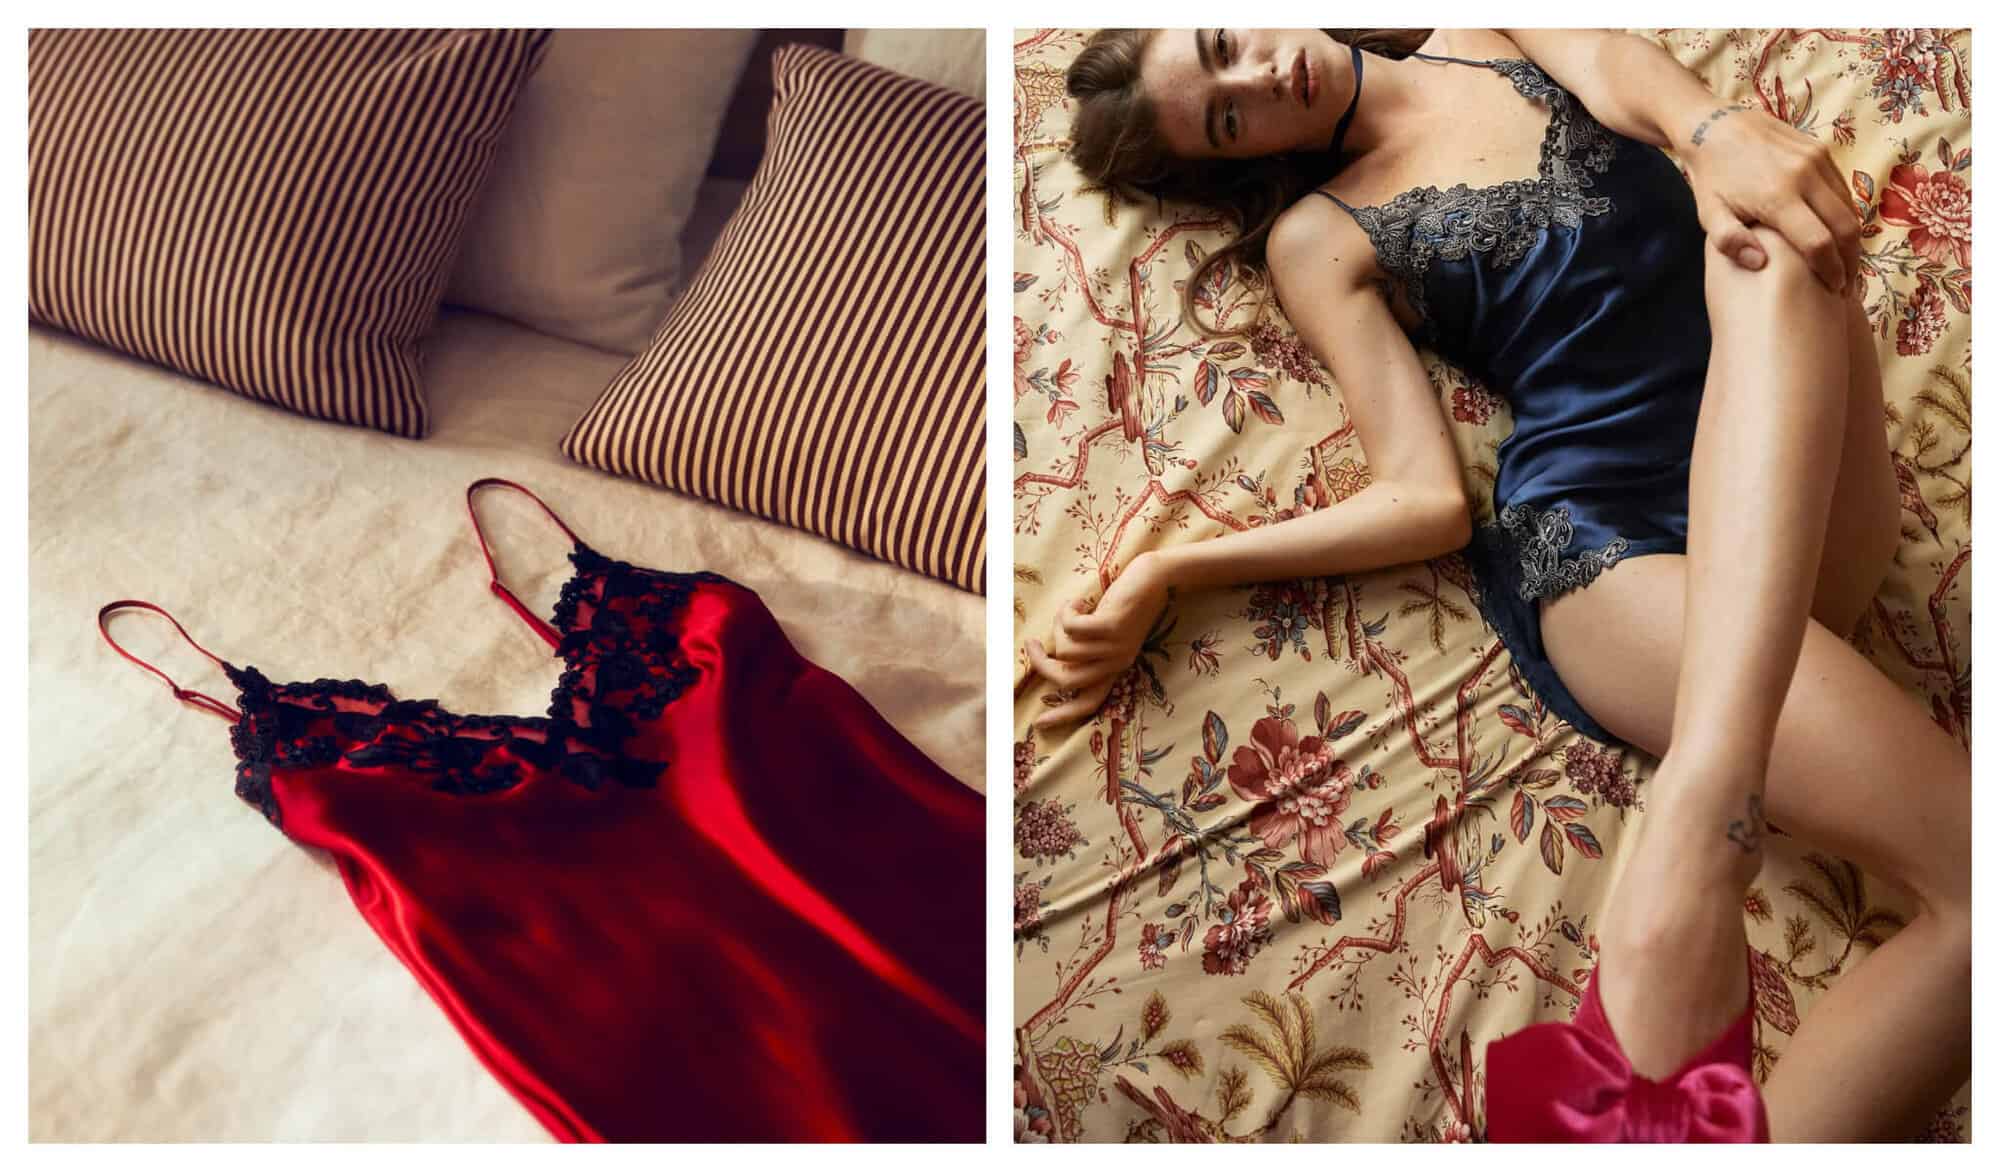 Right: A silk night slip for women in red lays in a beige bed. Right: A woman dressed in a blue silk slip lies on a bed.